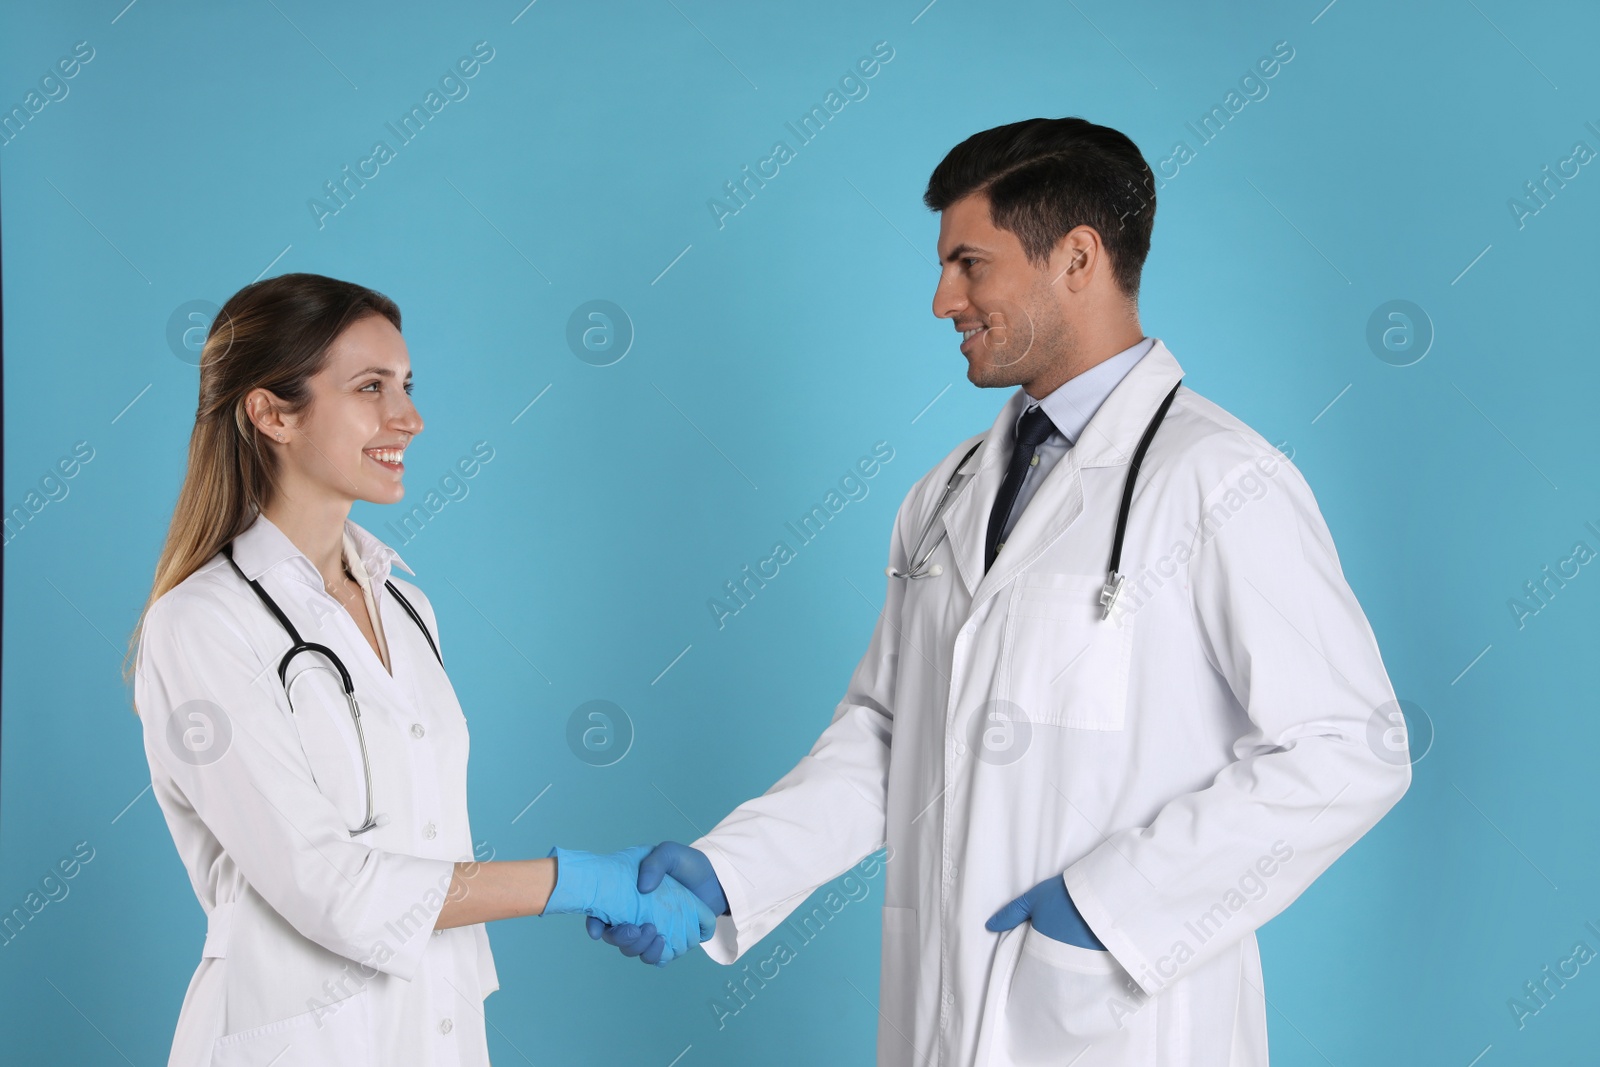 Photo of Doctors shaking hands on light blue background